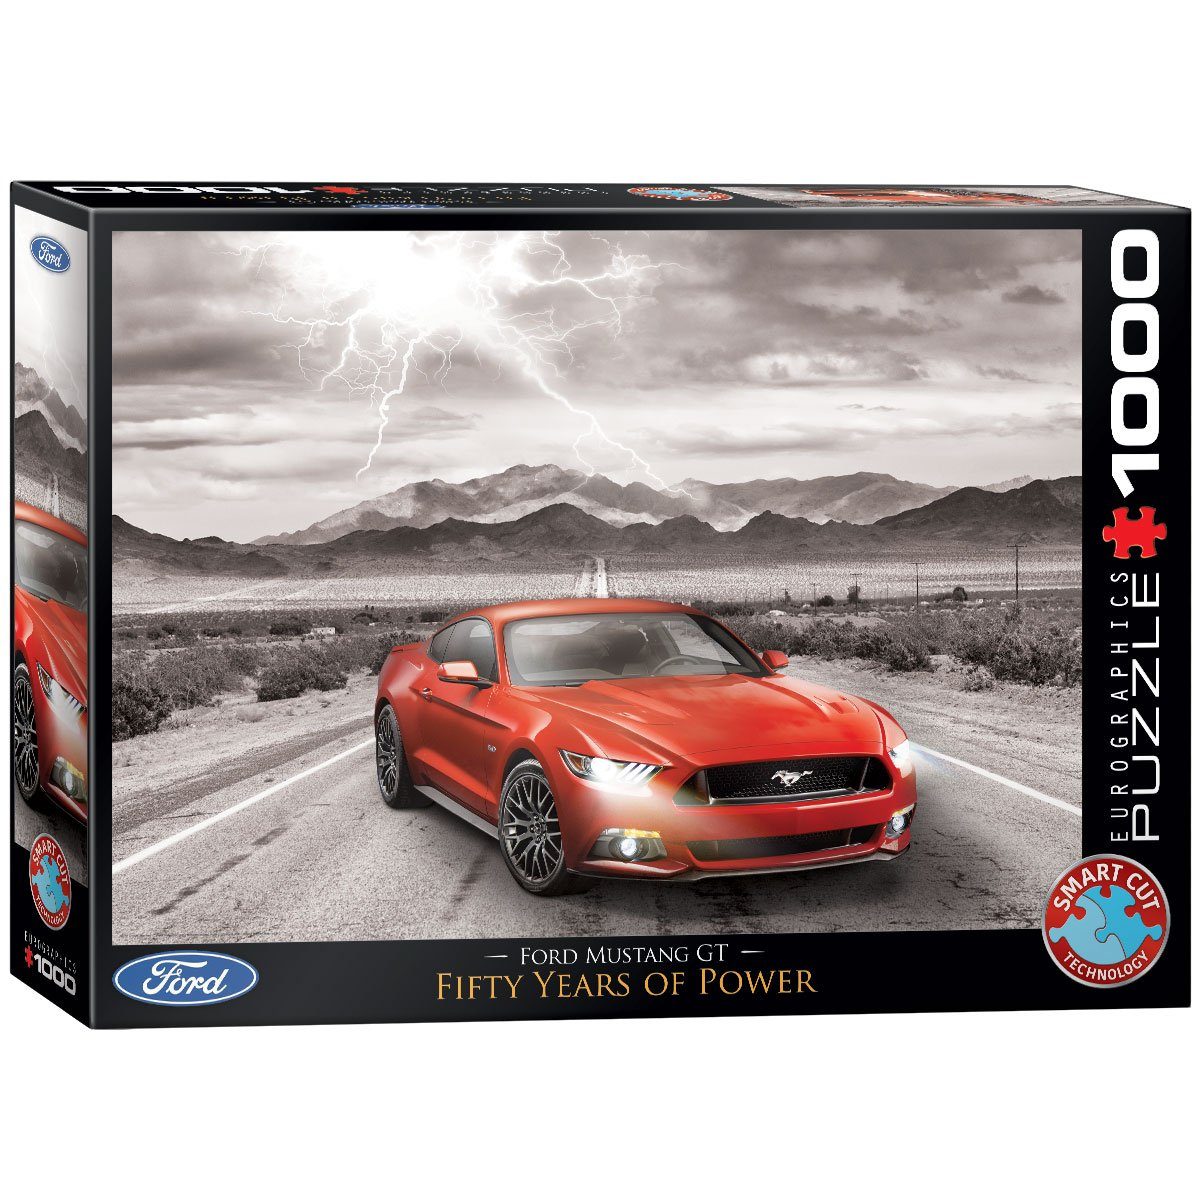 EUROGRAPHICS Puzzle Eurographics 6000-0702 Ford GT Mustang Puzzleteile Puzzle, 1000